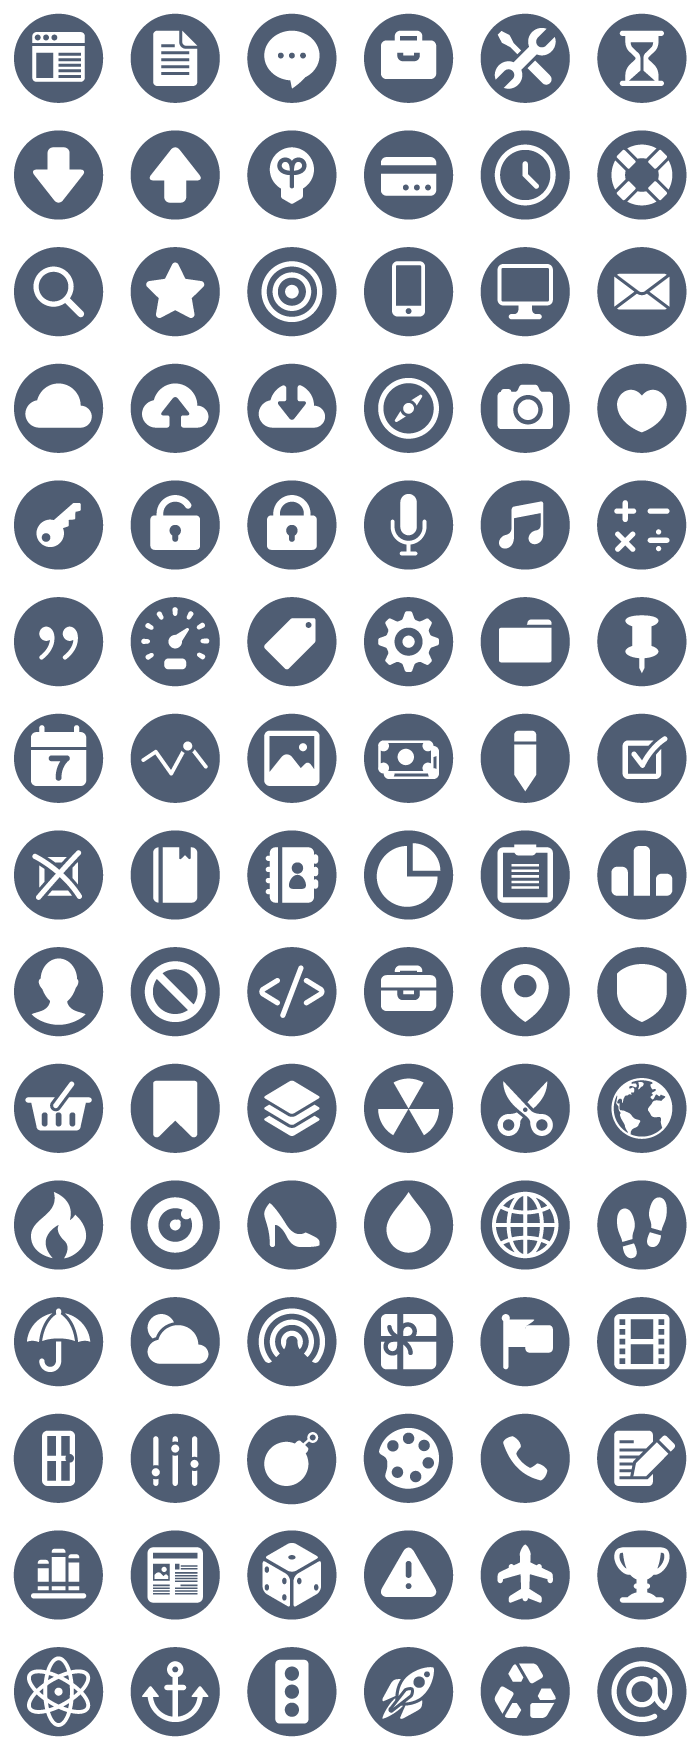 Download Elegant Business Icon Circle Pack - Vector download